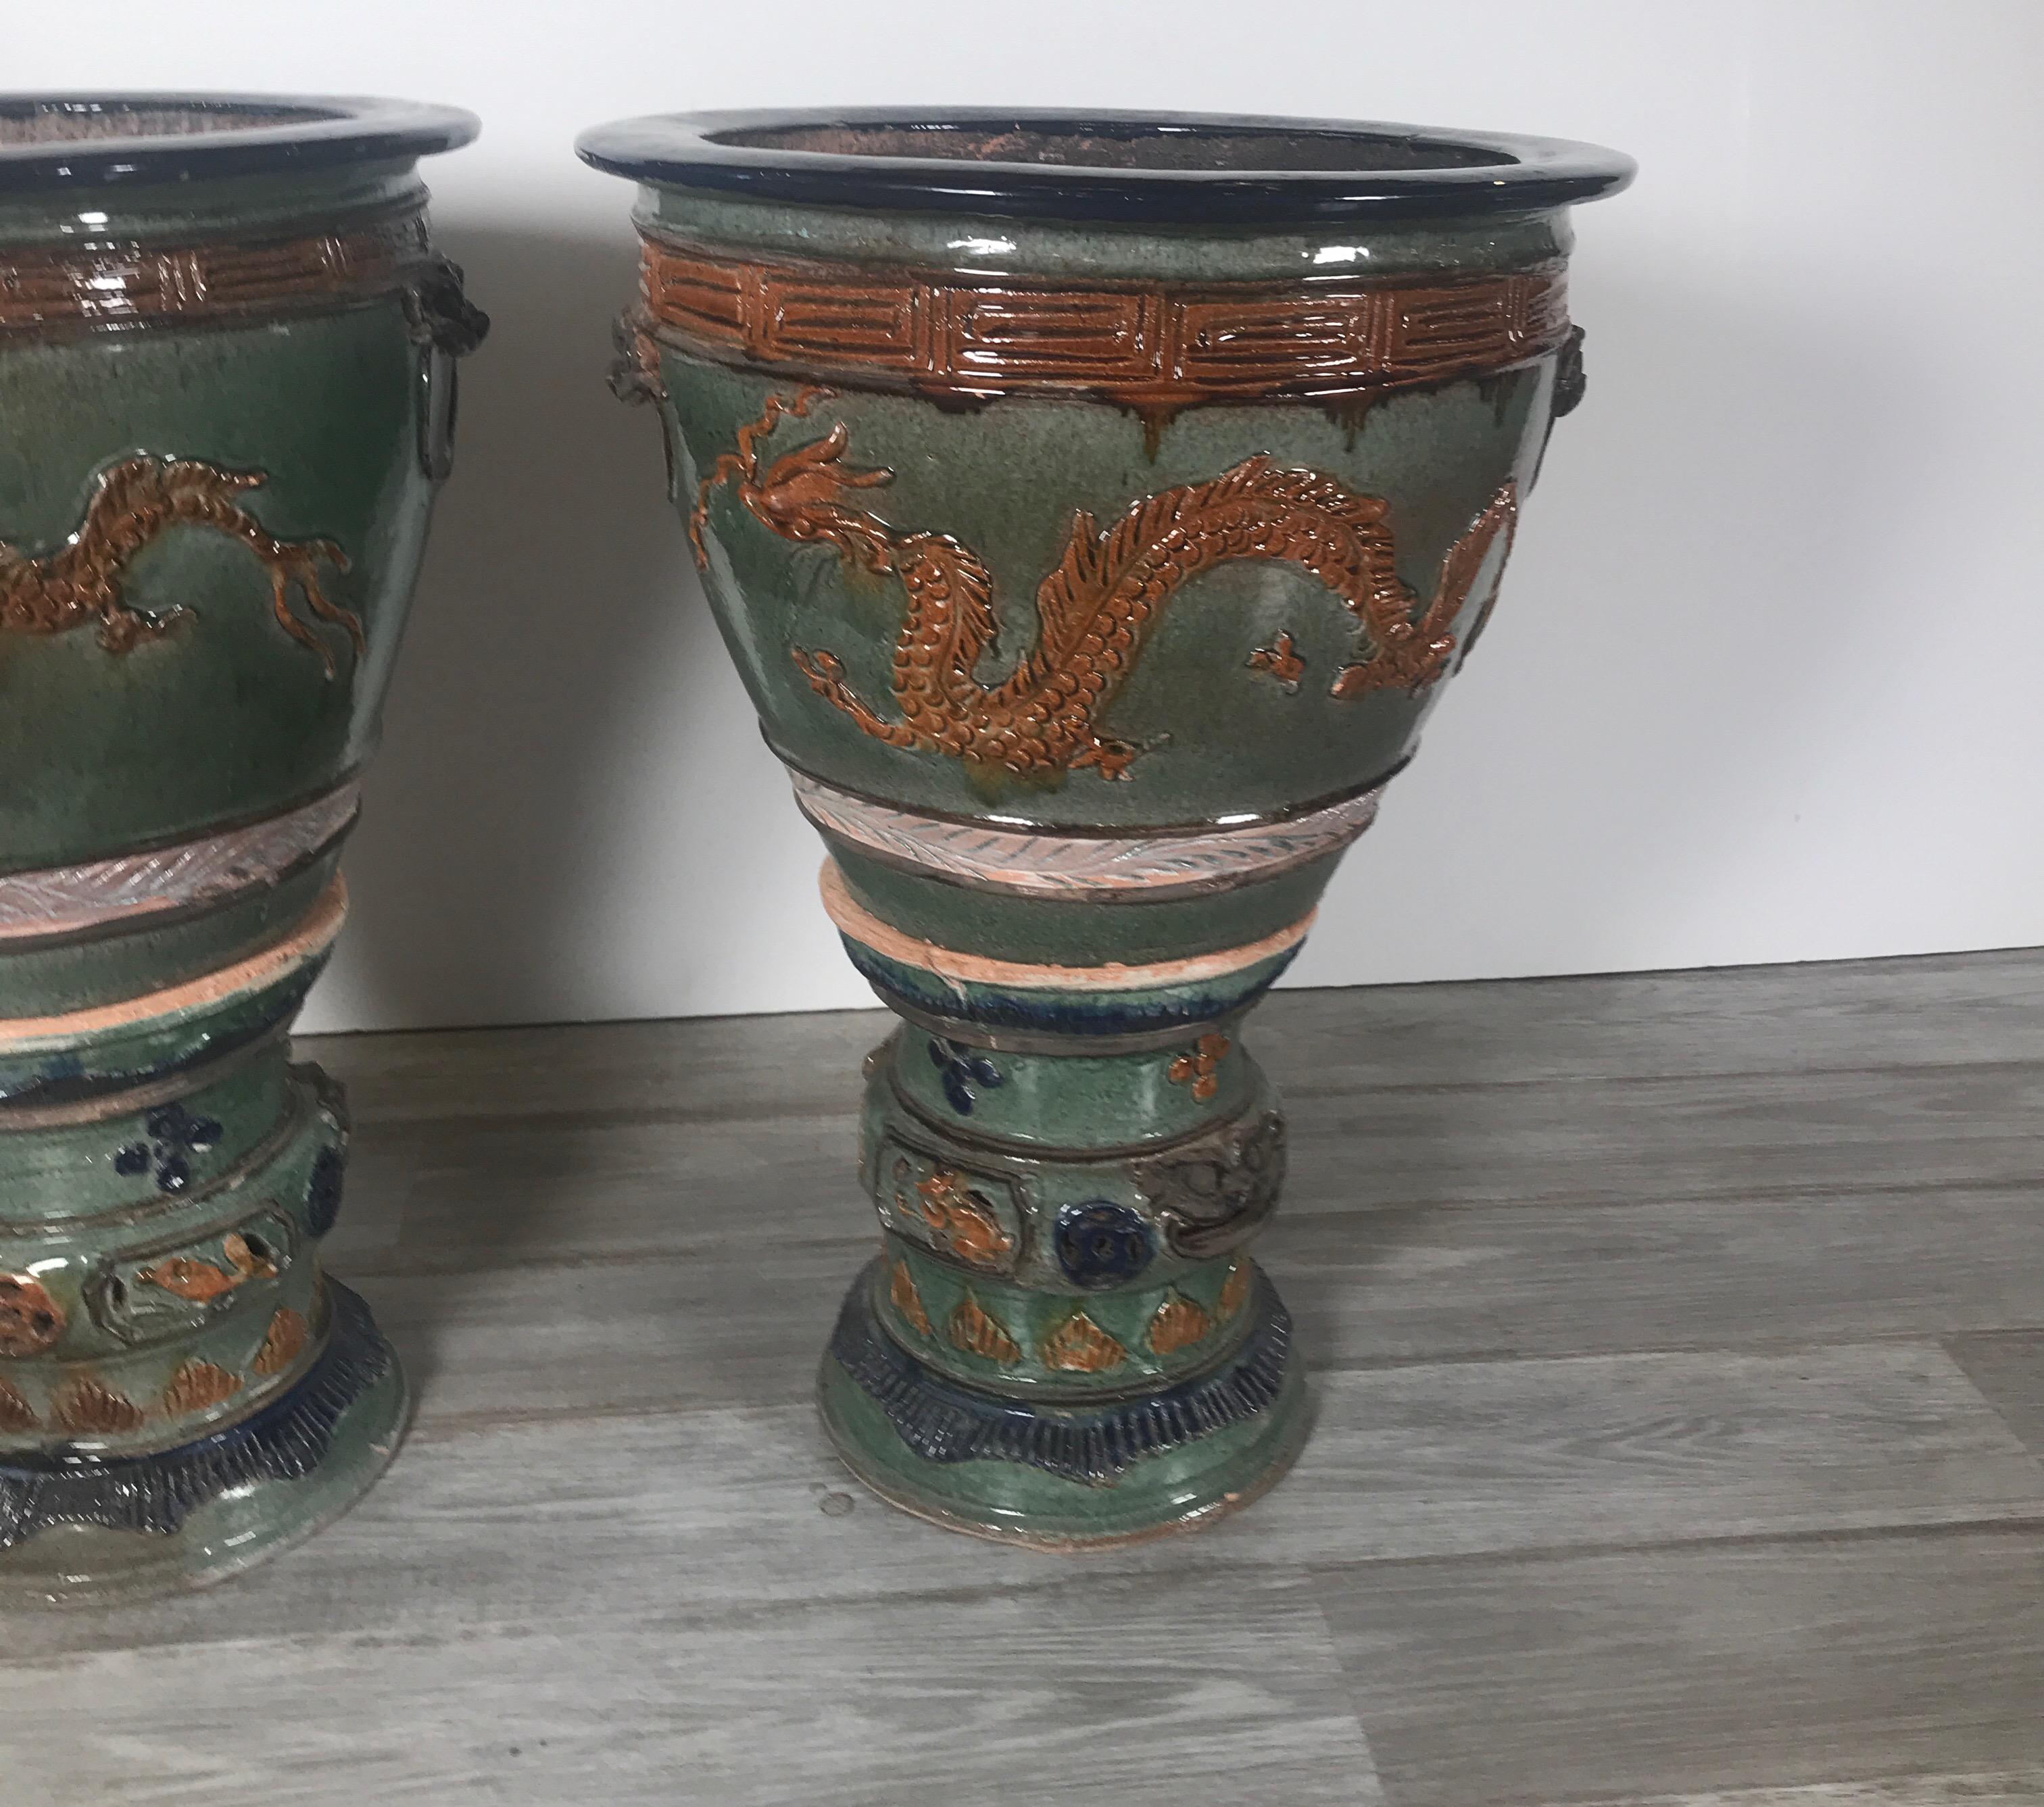 Chinese Export Pair of Chinese Glazed Terracotta Jardinieres Planters